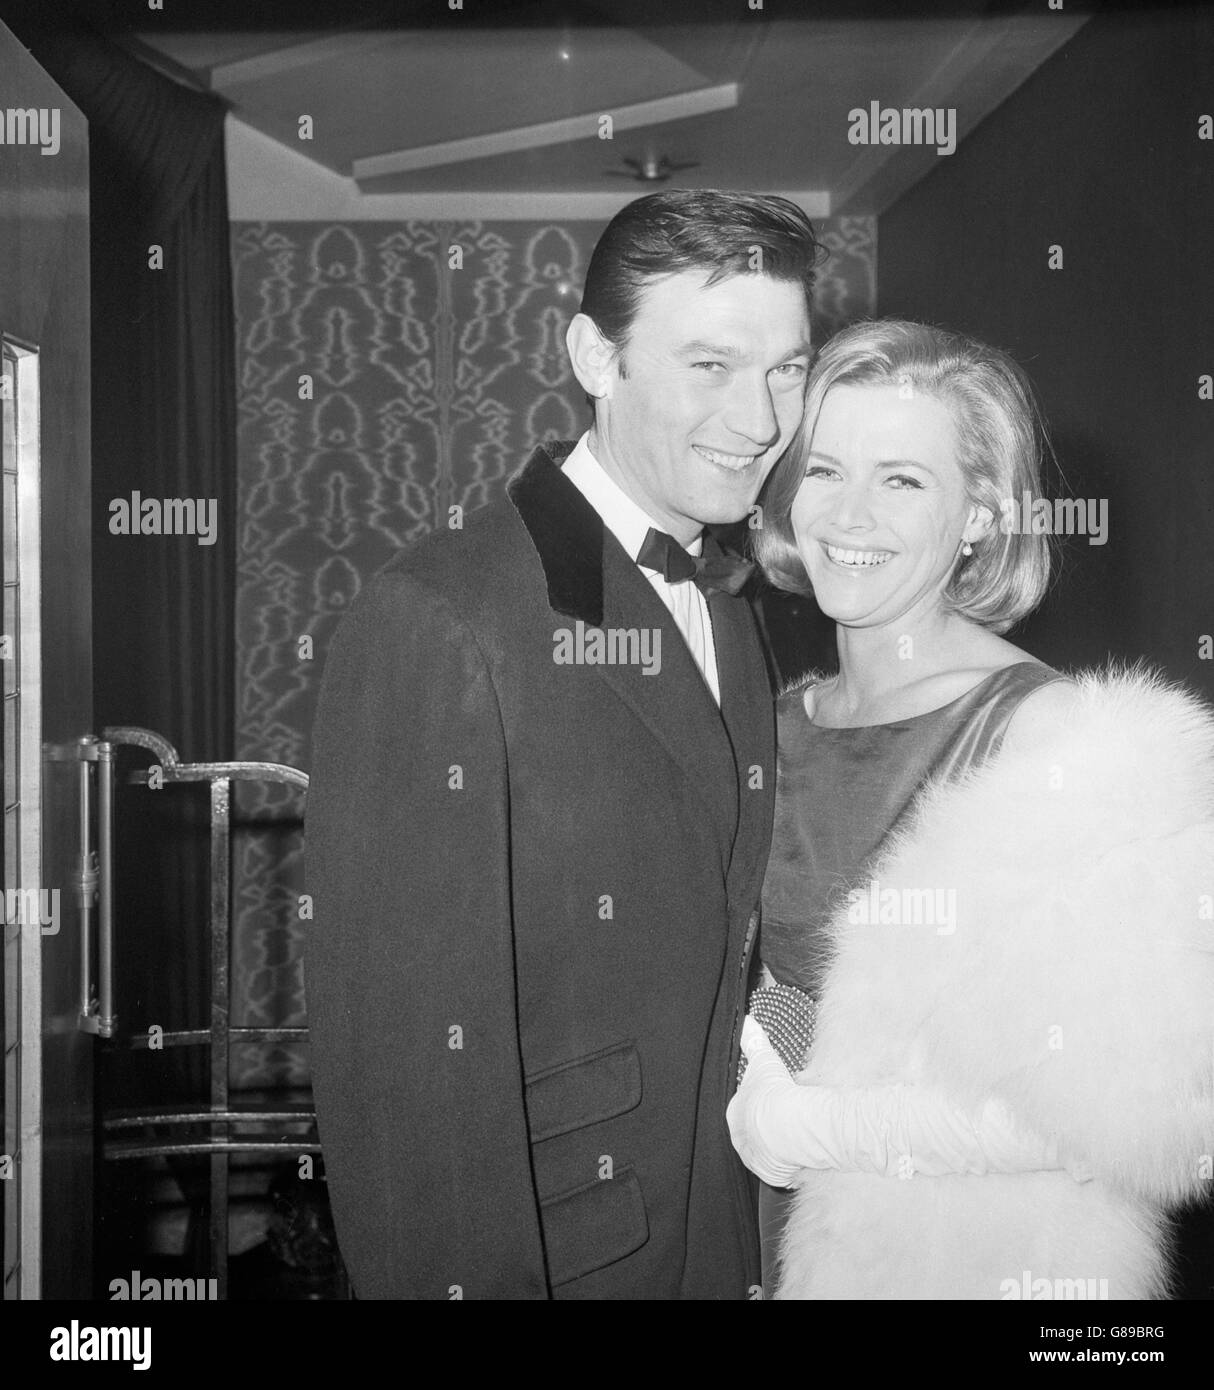 Laurence Harvey and Honor Blackman arrive for the British opening of Life at the Top at the Odeon, Leicester Square. The new film is a continuation of Room at the Top and Harvey repeats his portrayal of opportunist Joe Lampton. Stock Photo